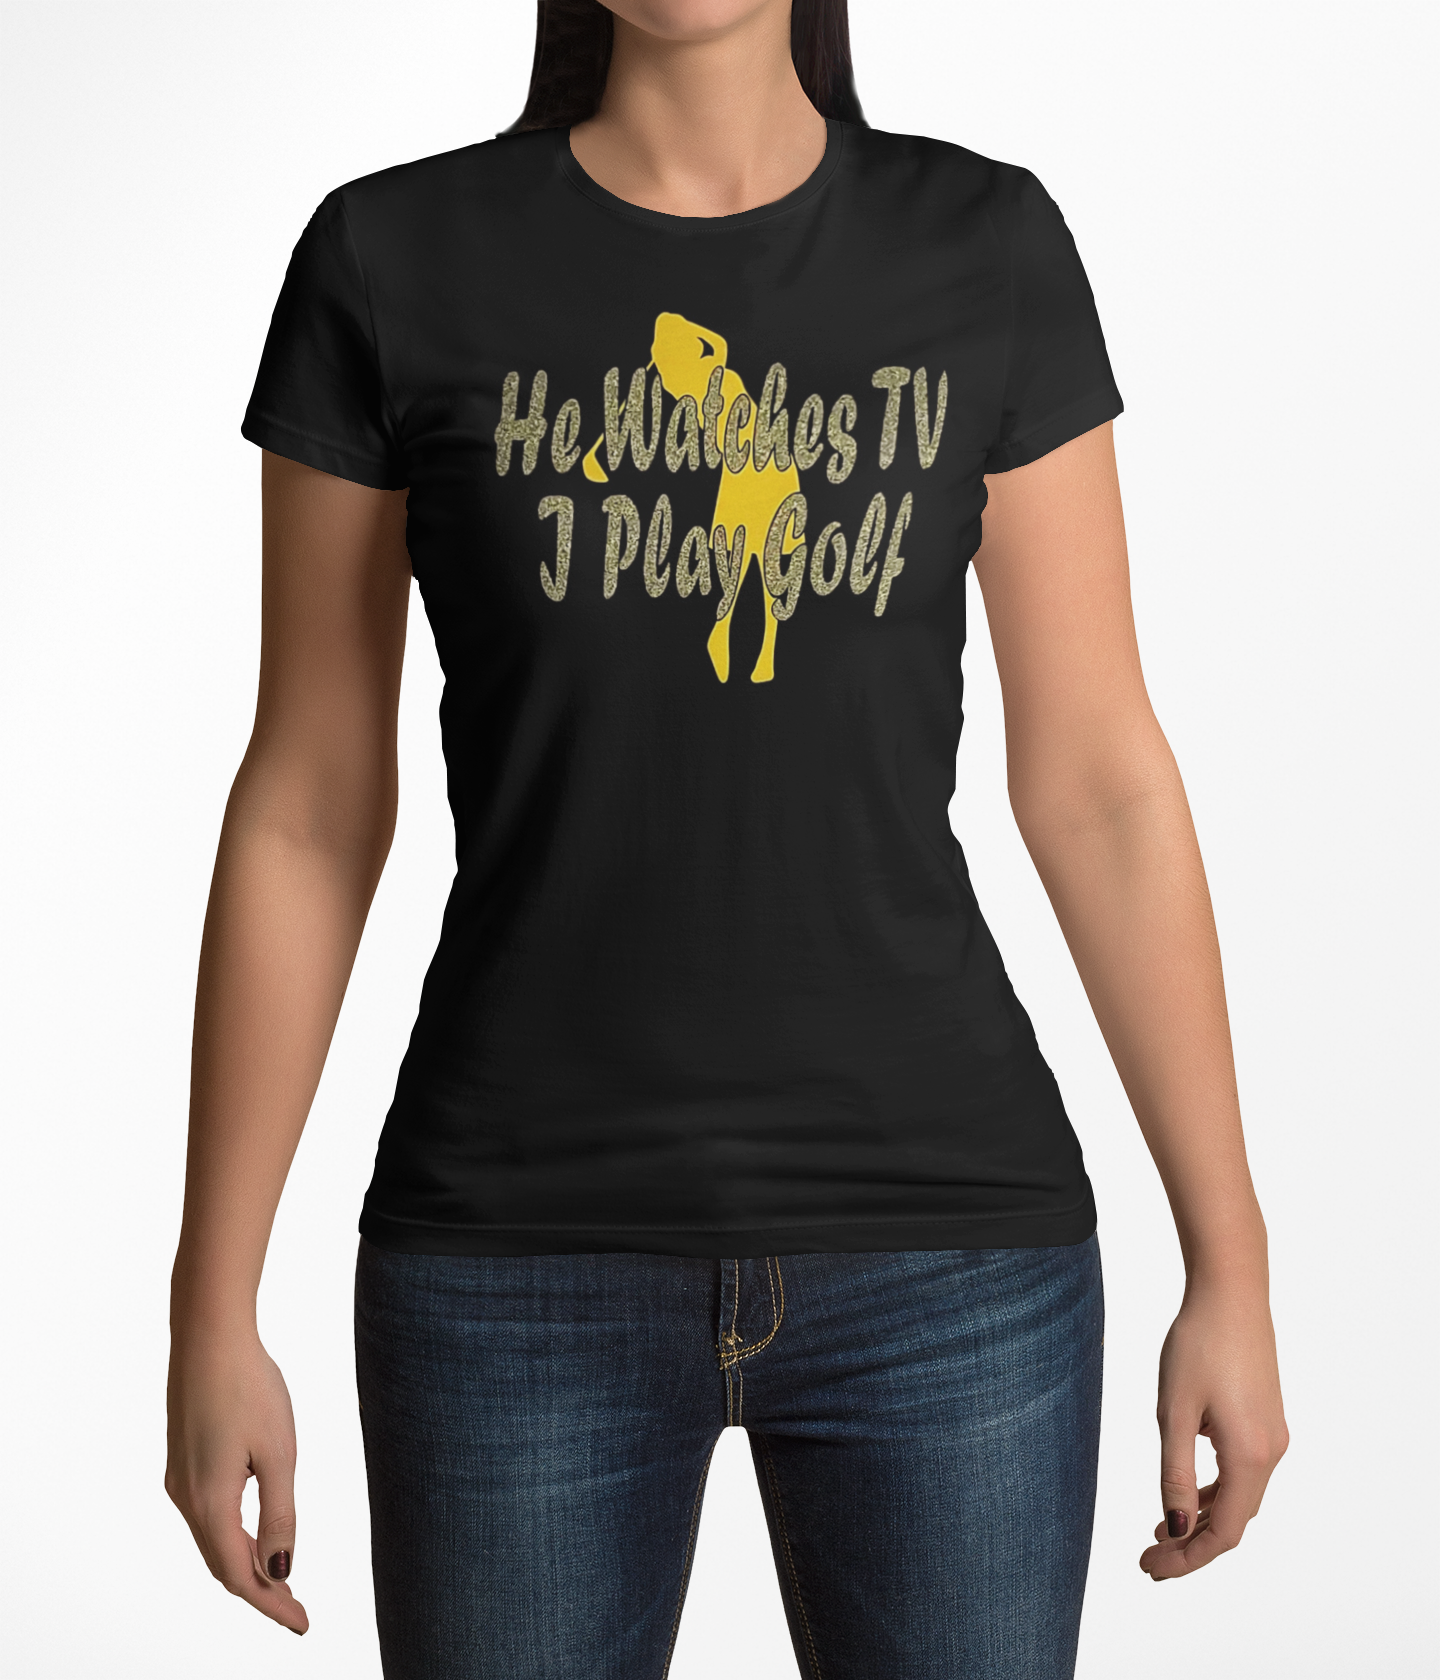 He Watches TV I Play Golf Women's T-Shirts (STYLE #2)